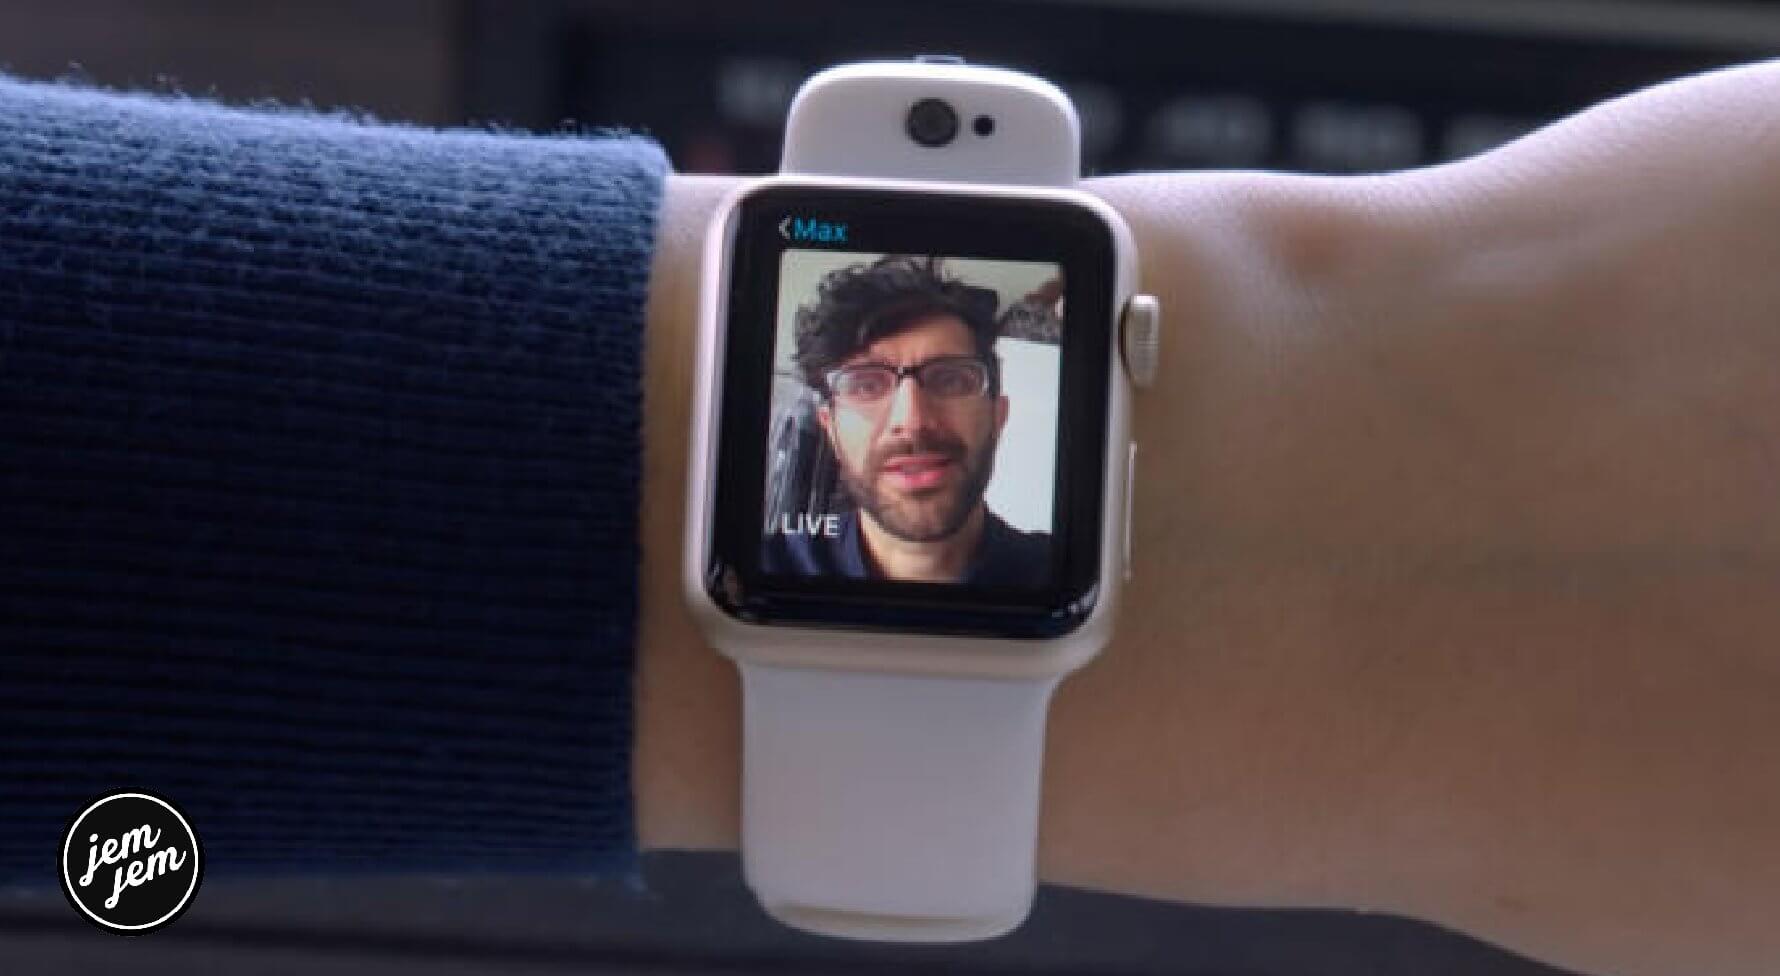 How to make a FaceTime call on Apple Watch